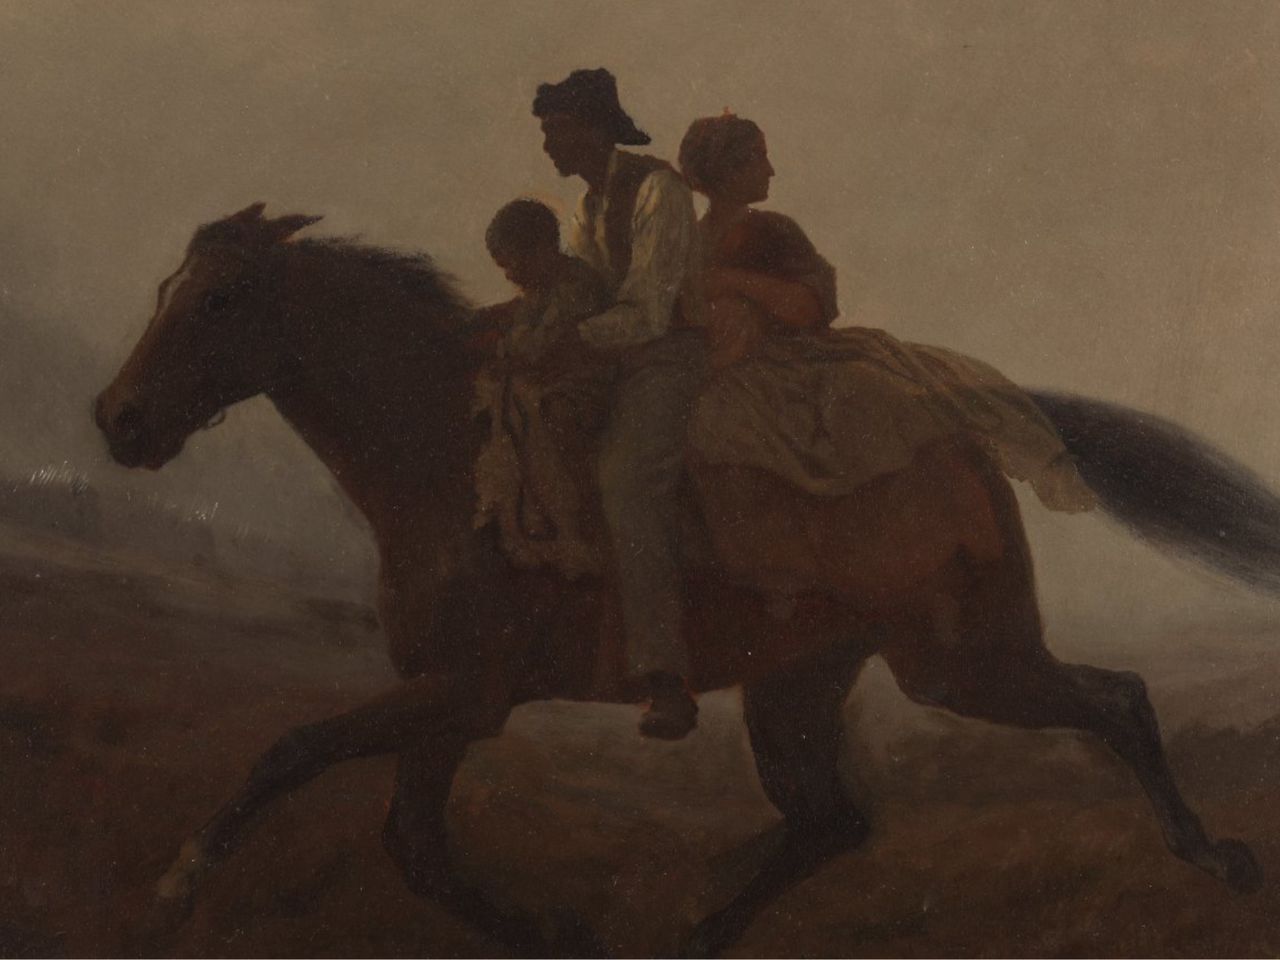 Oil painting from 1862 by Eastman Johnson showing an enslaved family on horse, riding to Union lines